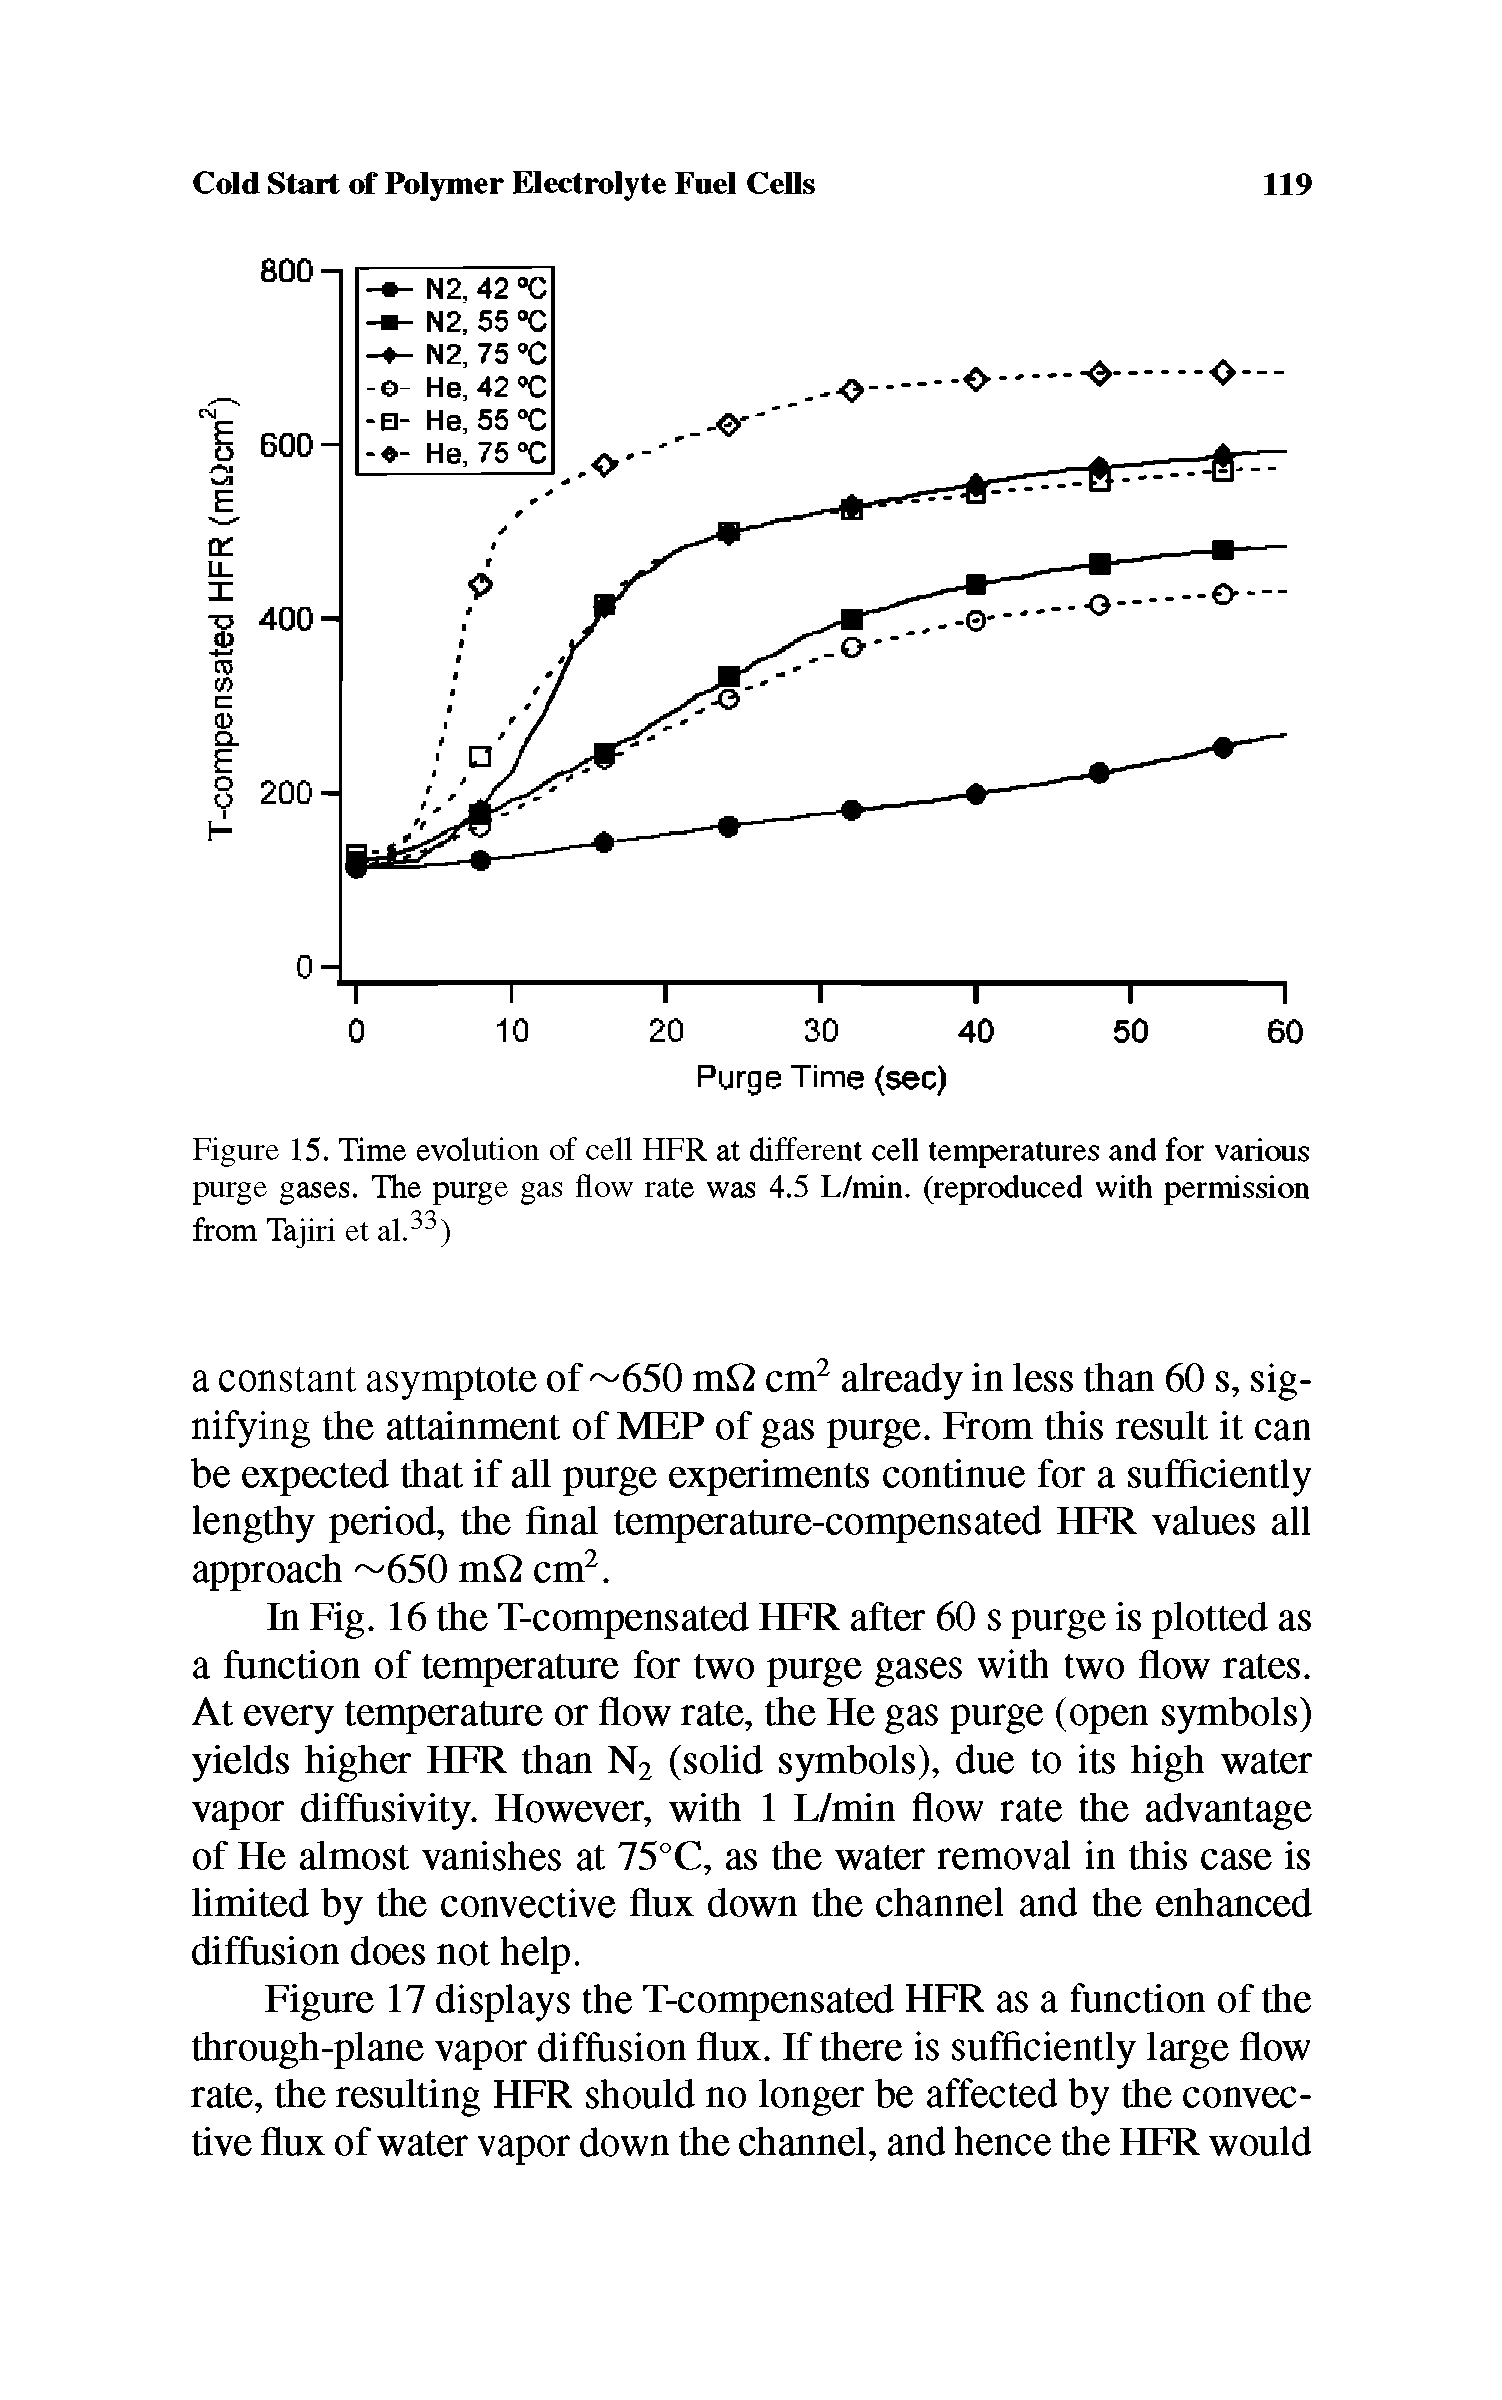 Figure 15. Time evolution of cell HFR at different cell temperatures and for various purge gases. The purge gas flow rate was 4.5 L/min. (reproduced with permission from Tajiri et at.33)...